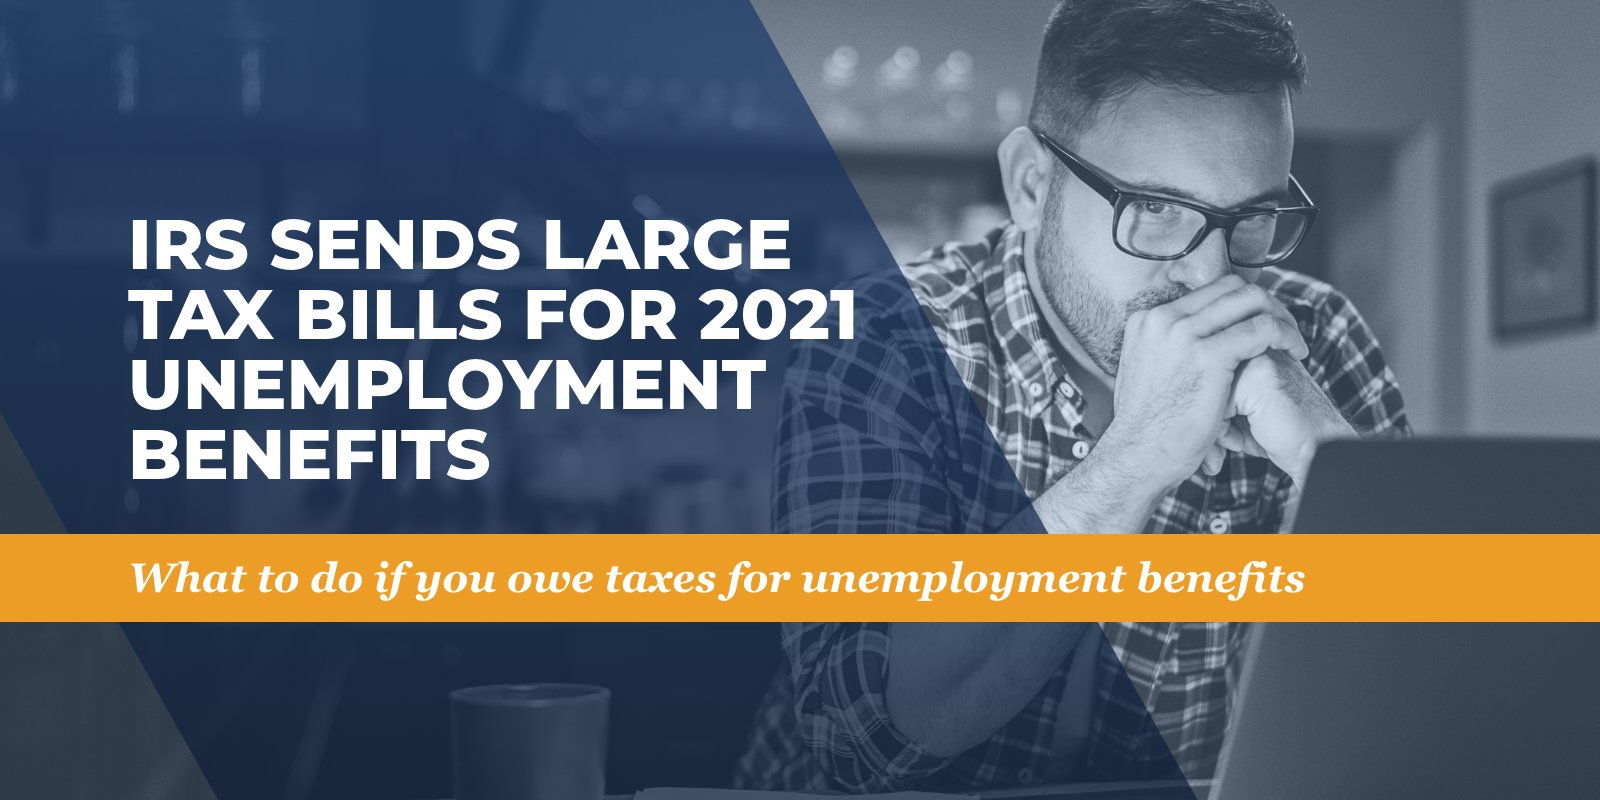 IRS Sends Large Tax Bills for 2021 Unemployment Benefits